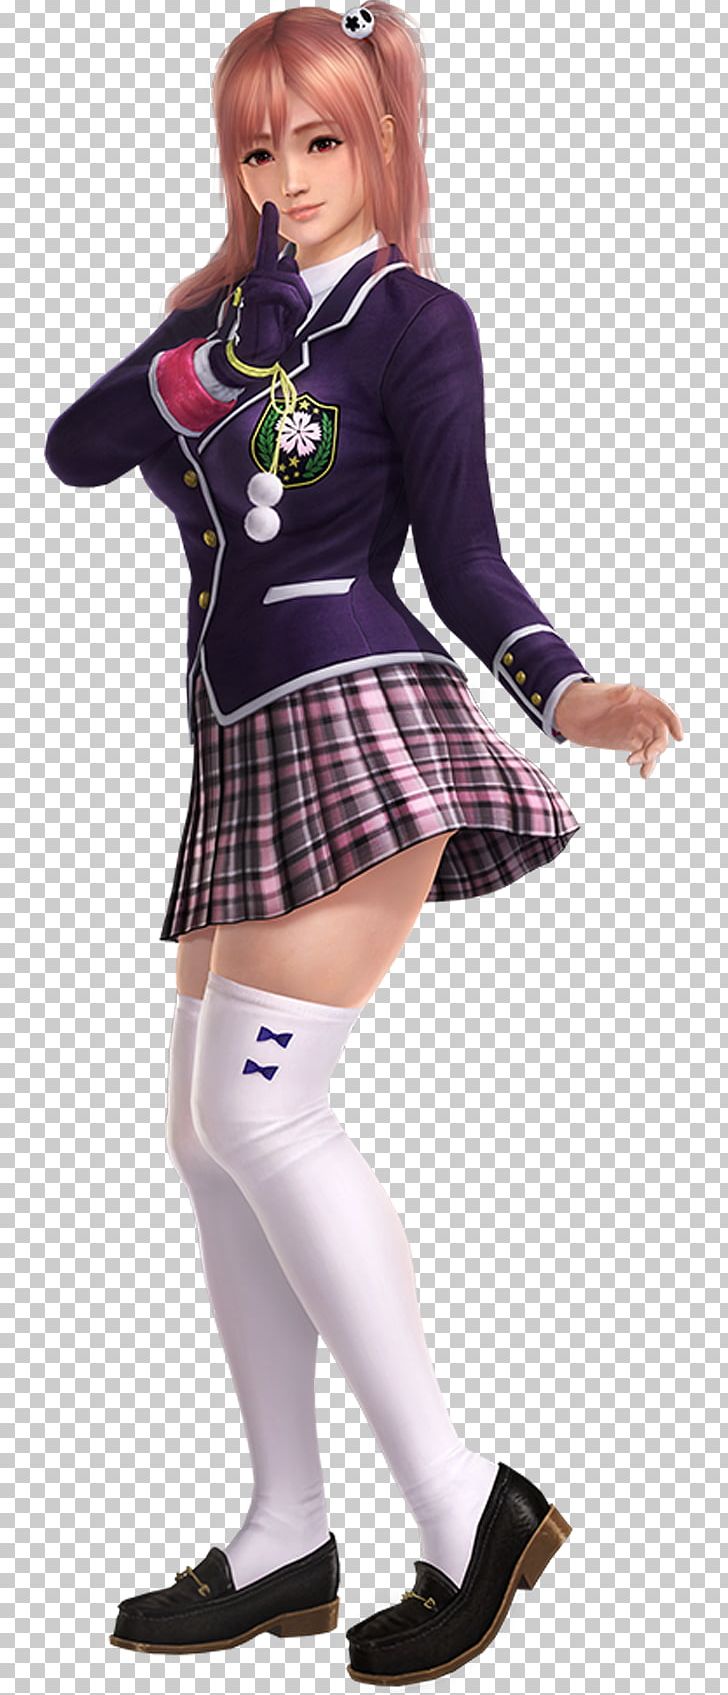 Dead Or Alive 5 Last Round Dead Or Alive 5 Ultimate Warriors All-Stars Ayane PNG, Clipart, Arcade Game, Ayane, Chee, Clothing, Costume Free PNG Download